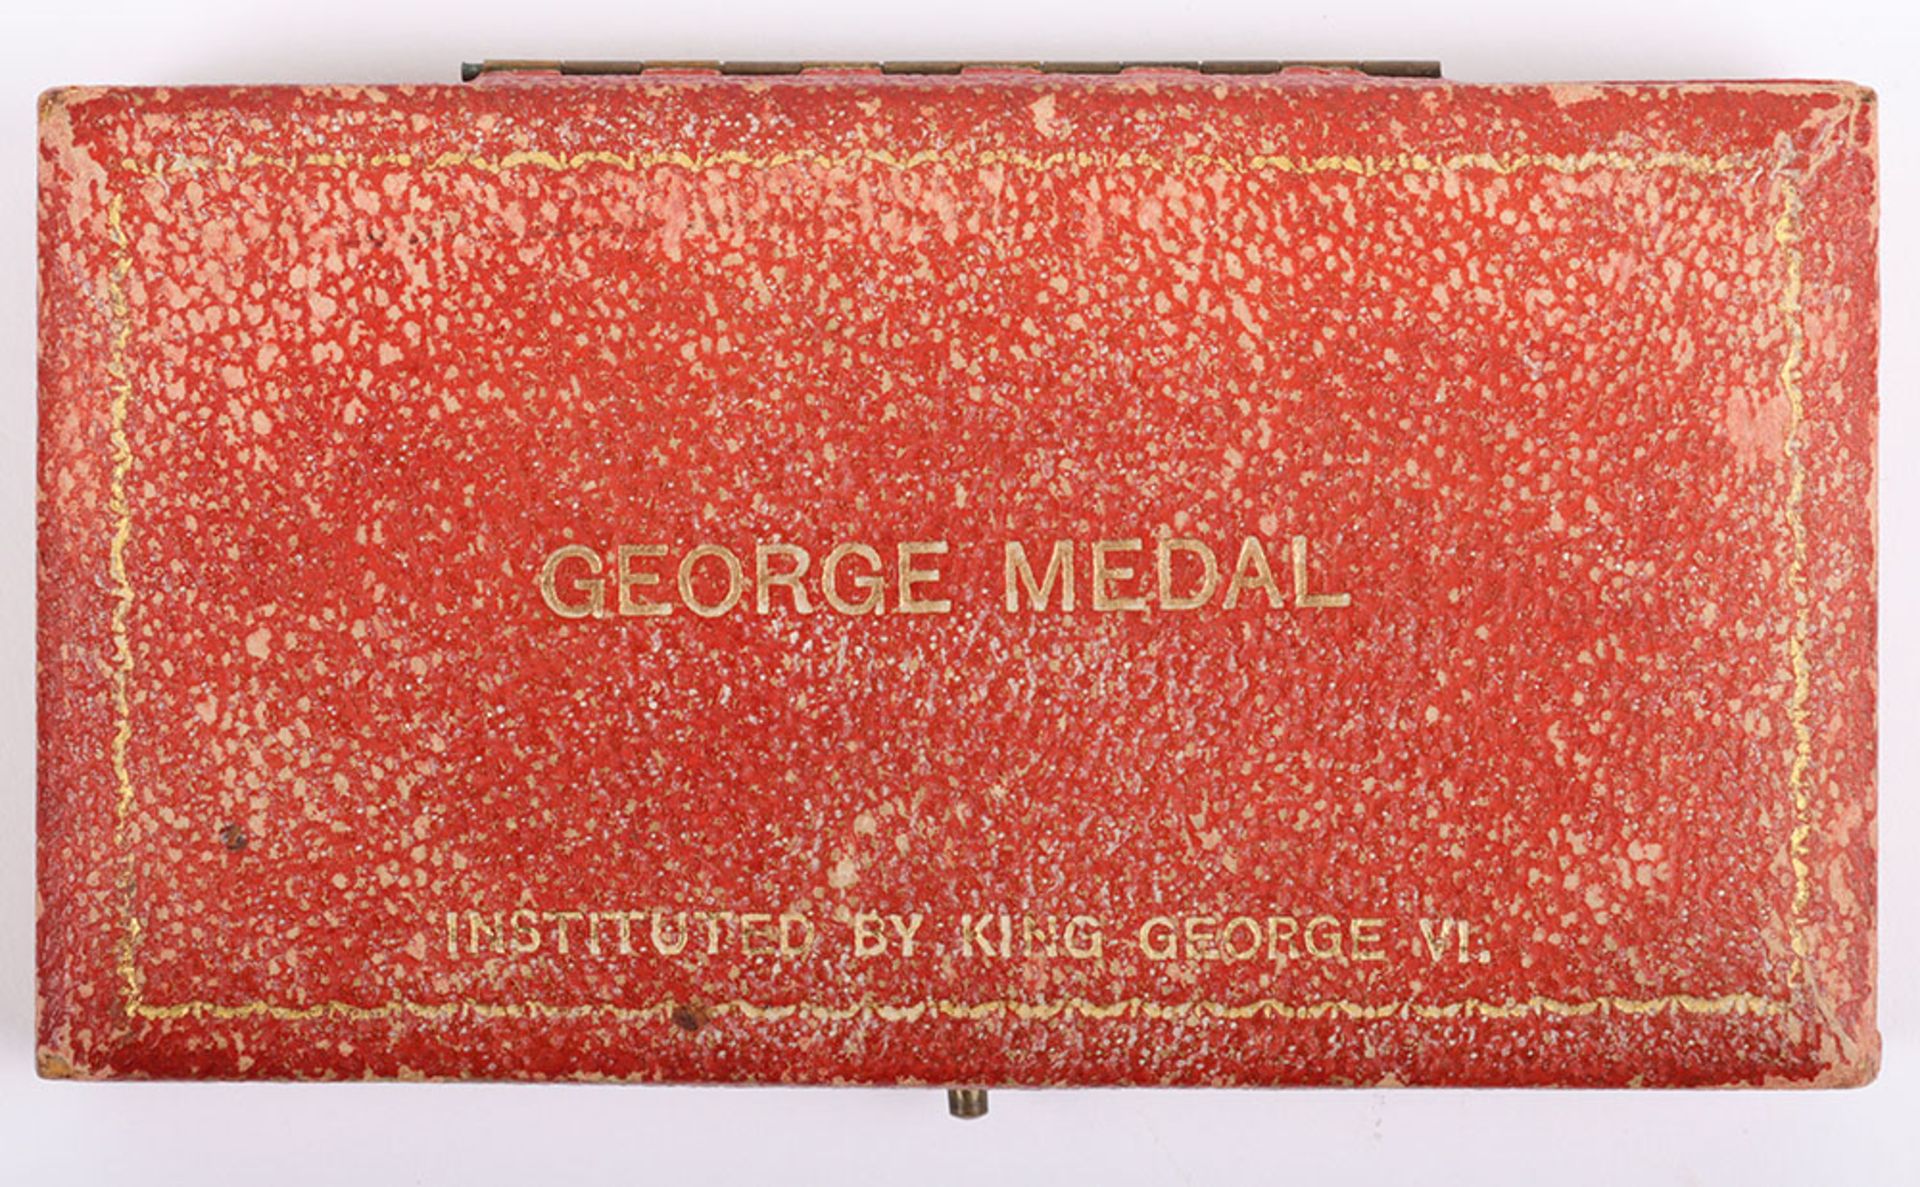 Second World War Birmingham Blitz Home Guard George Medal Awarded for Gallantry in Rescuing People T - Image 8 of 8